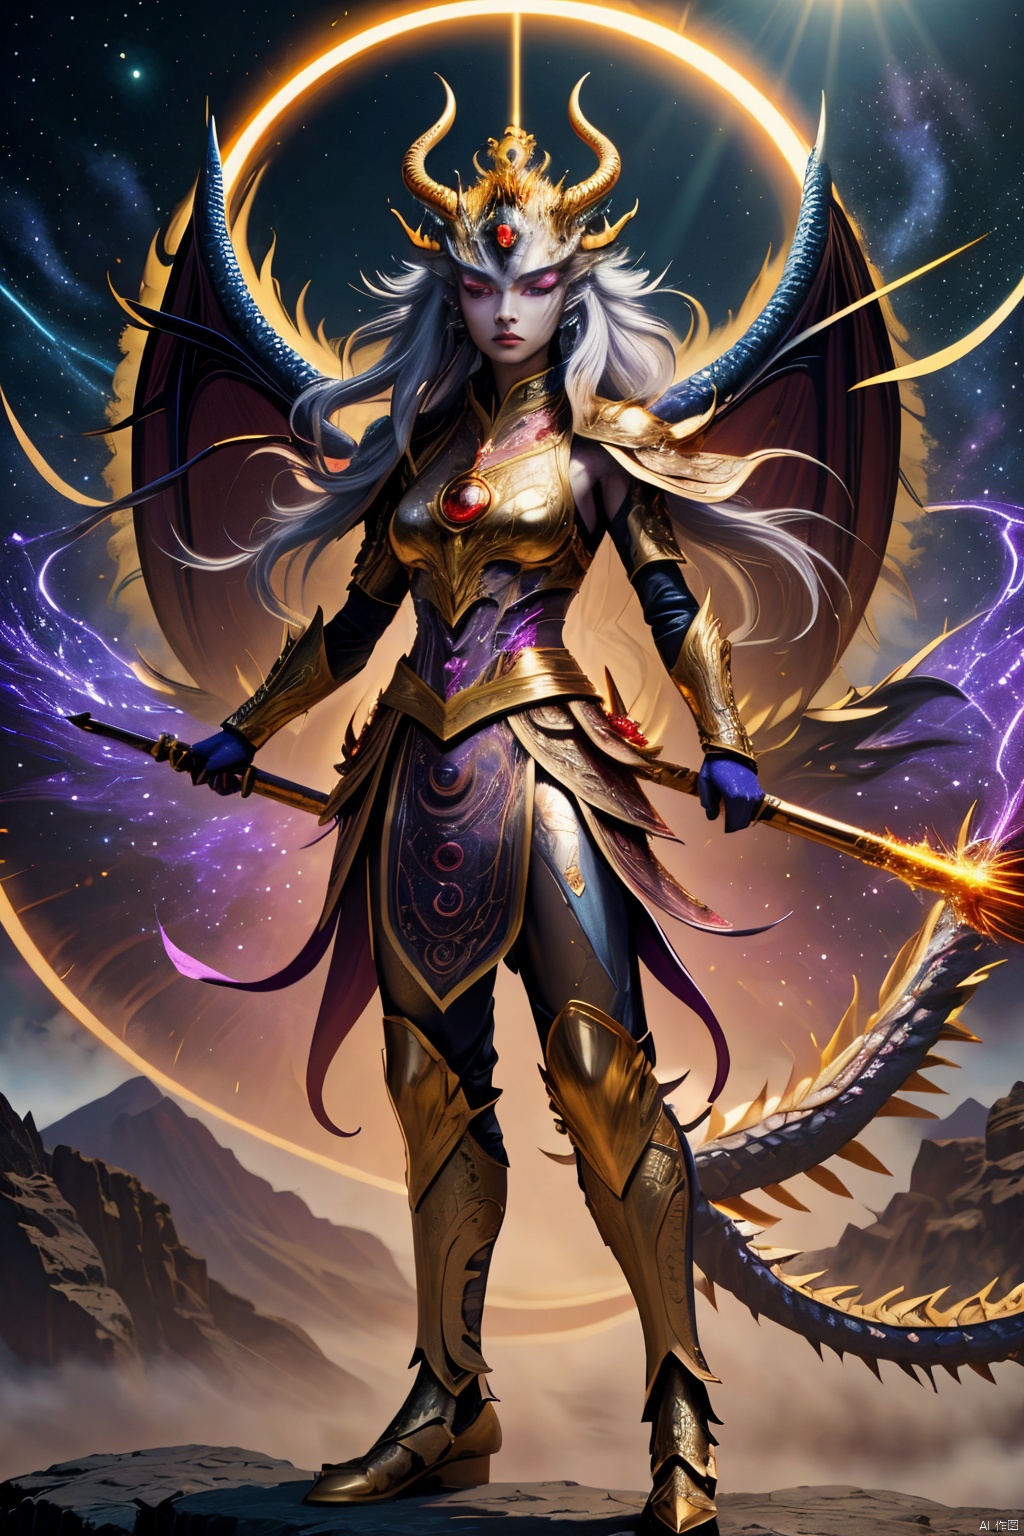  Colorful costumes, Standing posture, Anthropomorphism, National style, Female dragon image,long white hair, blue eyes, Powerful, Tender, Aesthetic, Heal, Mysterious power, Metallic scales, Shine in cosmic brilliance, Laser eye, Gamma ray eye, wisdom, Strength, Guide the growth and progress of the crypto space, Fly, Bless, Revelation, change, Stand upright, particles, x-ray,,<lora:660447313082219790:1.0>,<lora:660447313082219790:1.0>